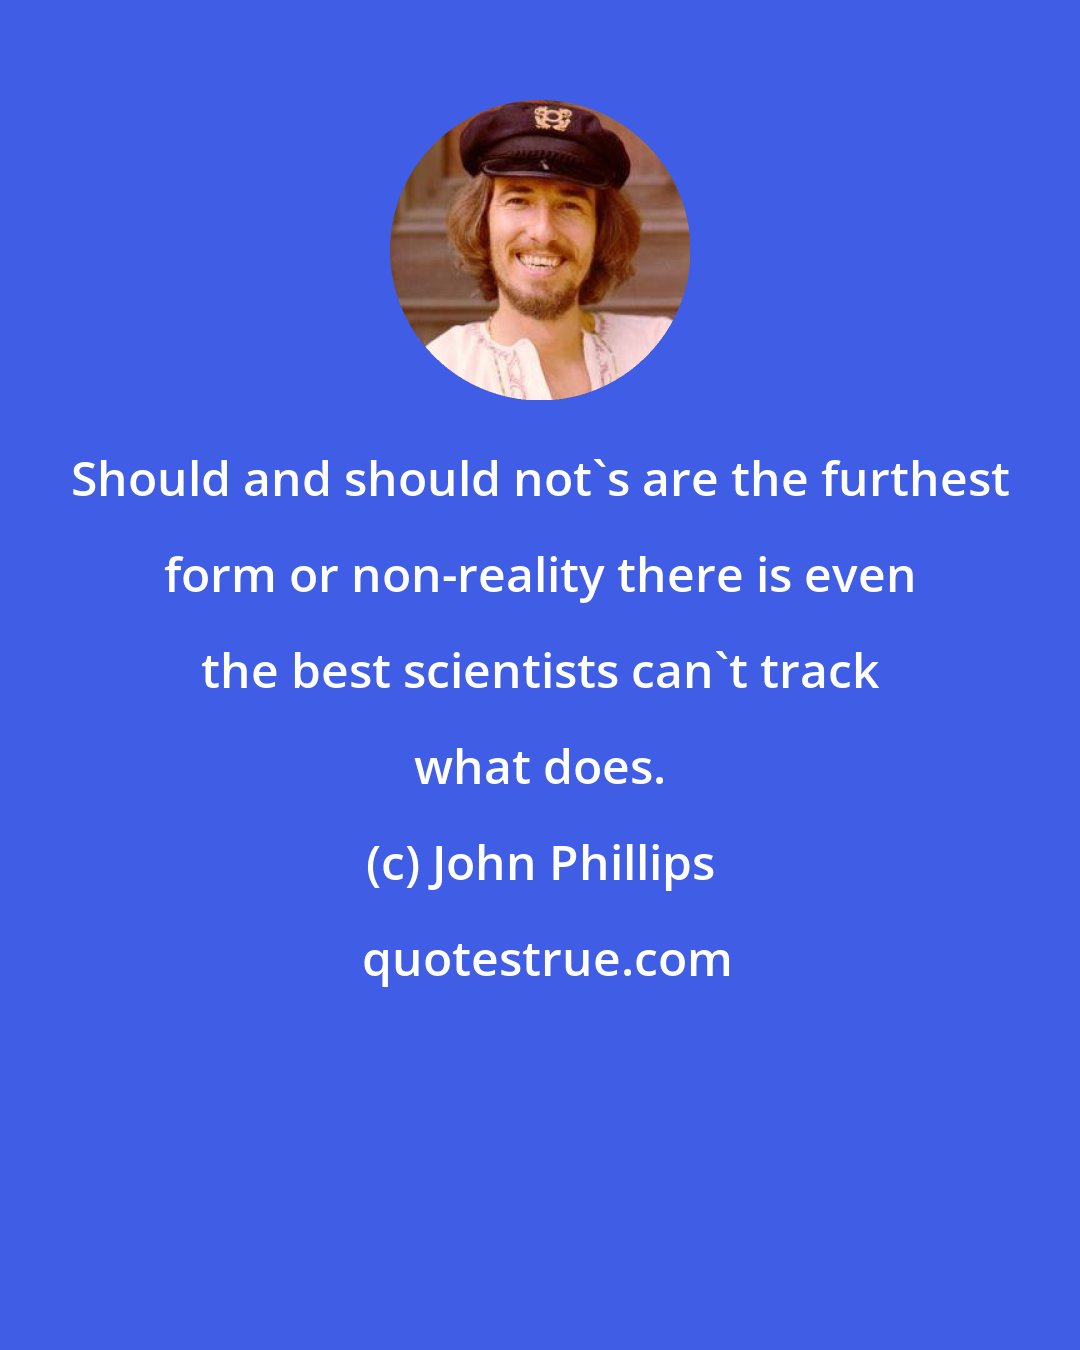 John Phillips: Should and should not's are the furthest form or non-reality there is even the best scientists can't track what does.